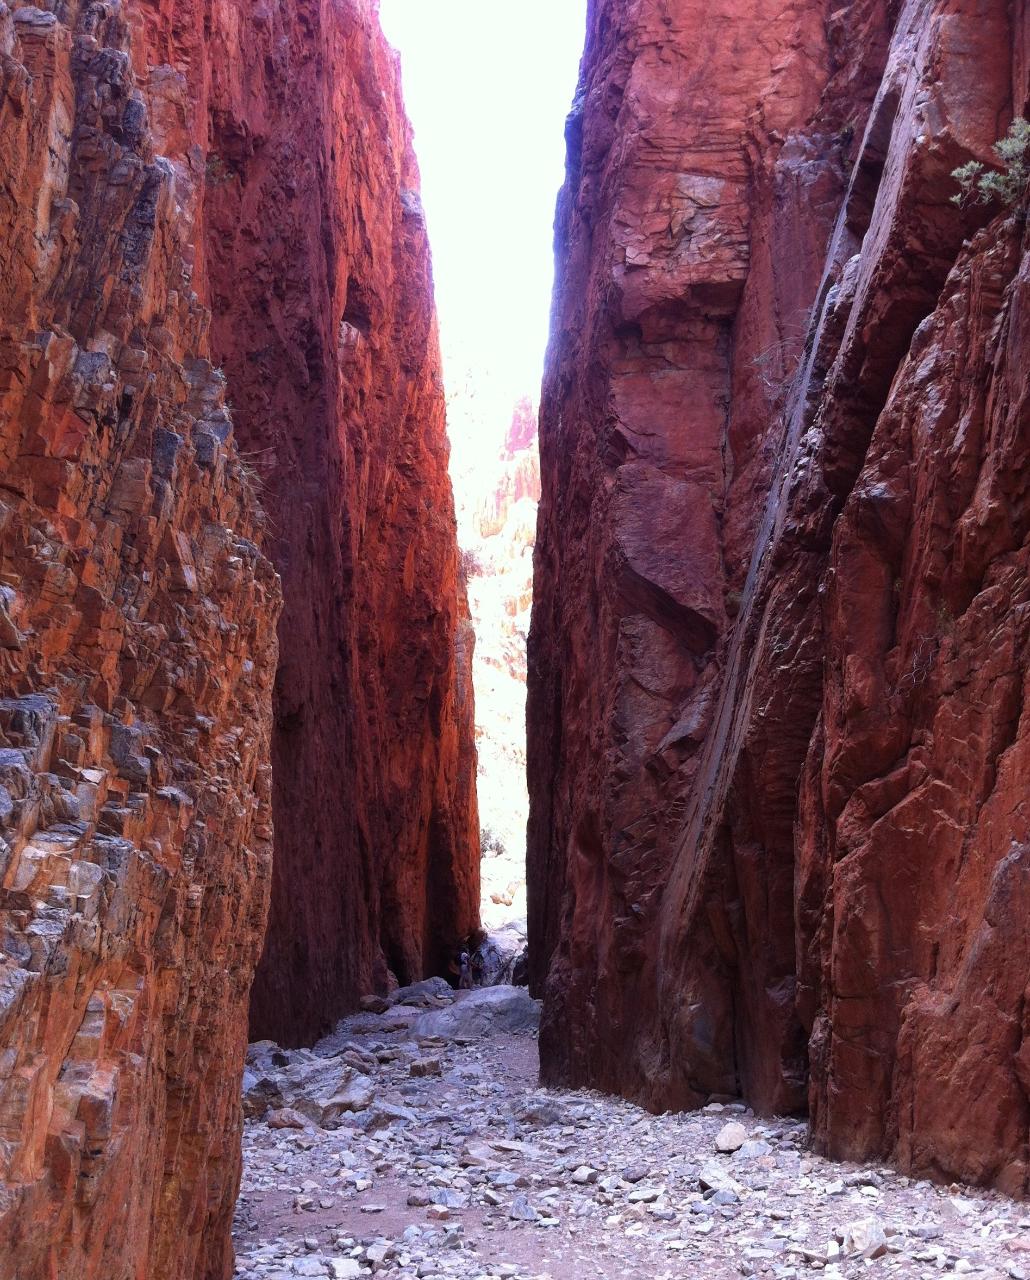  Standley Chasm to Alice Springs transfer